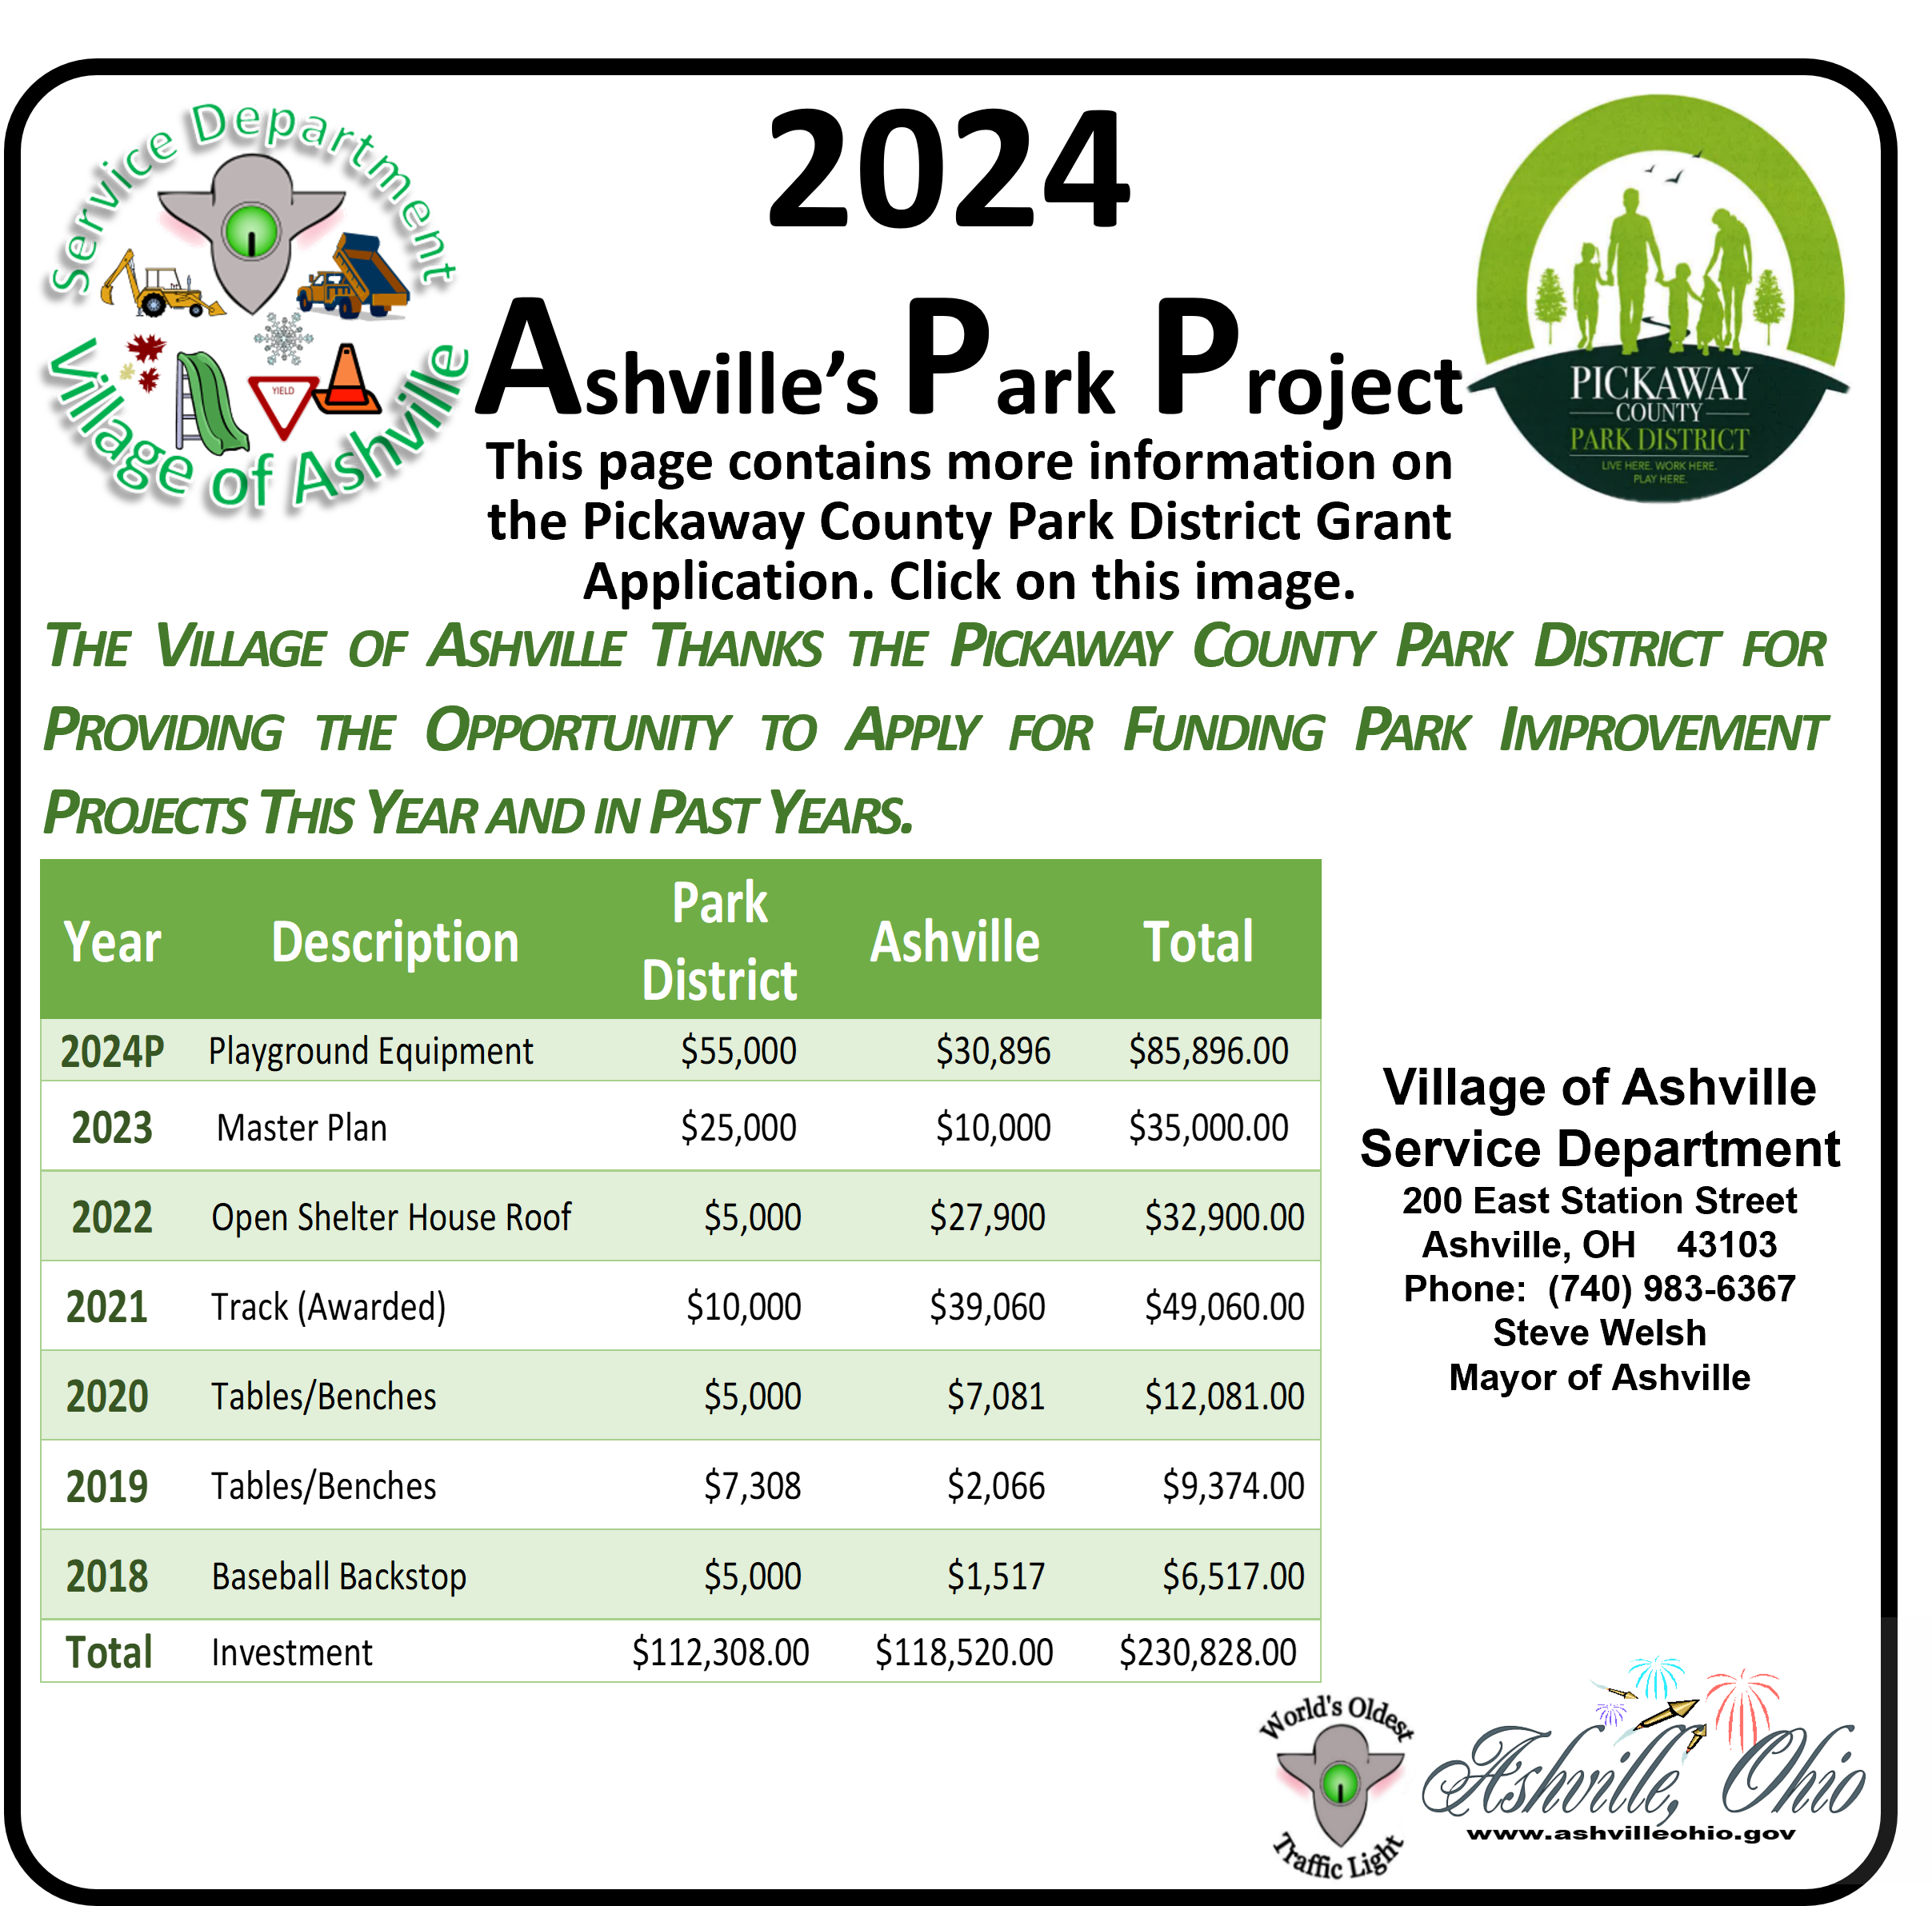 Pickaway County Park District Applications